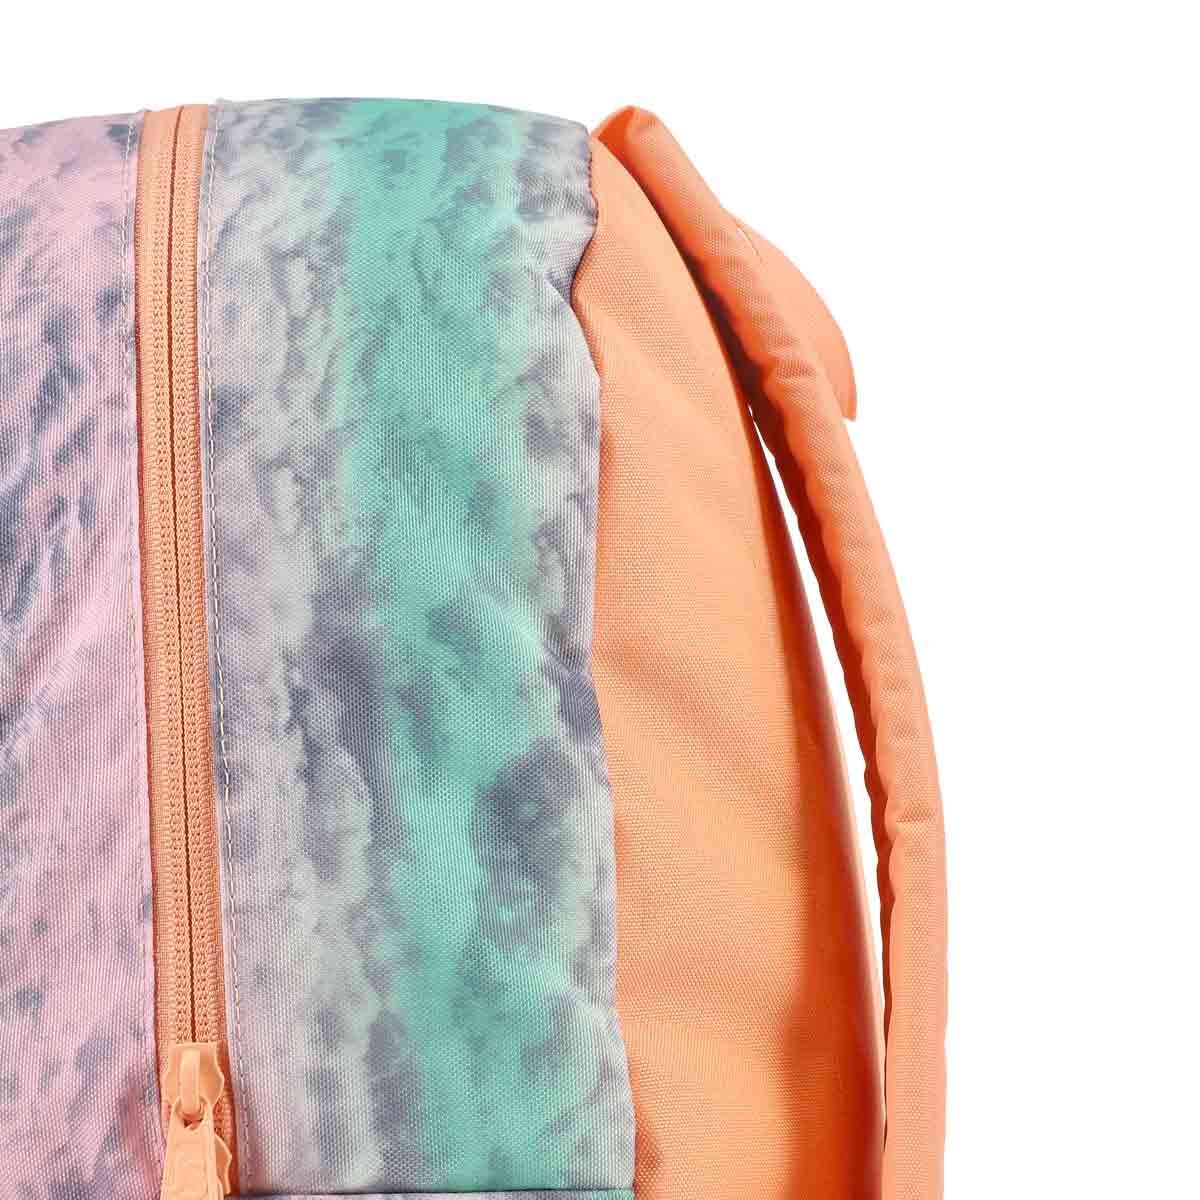 Jansport Cross Town Backpack - Cotton Candy